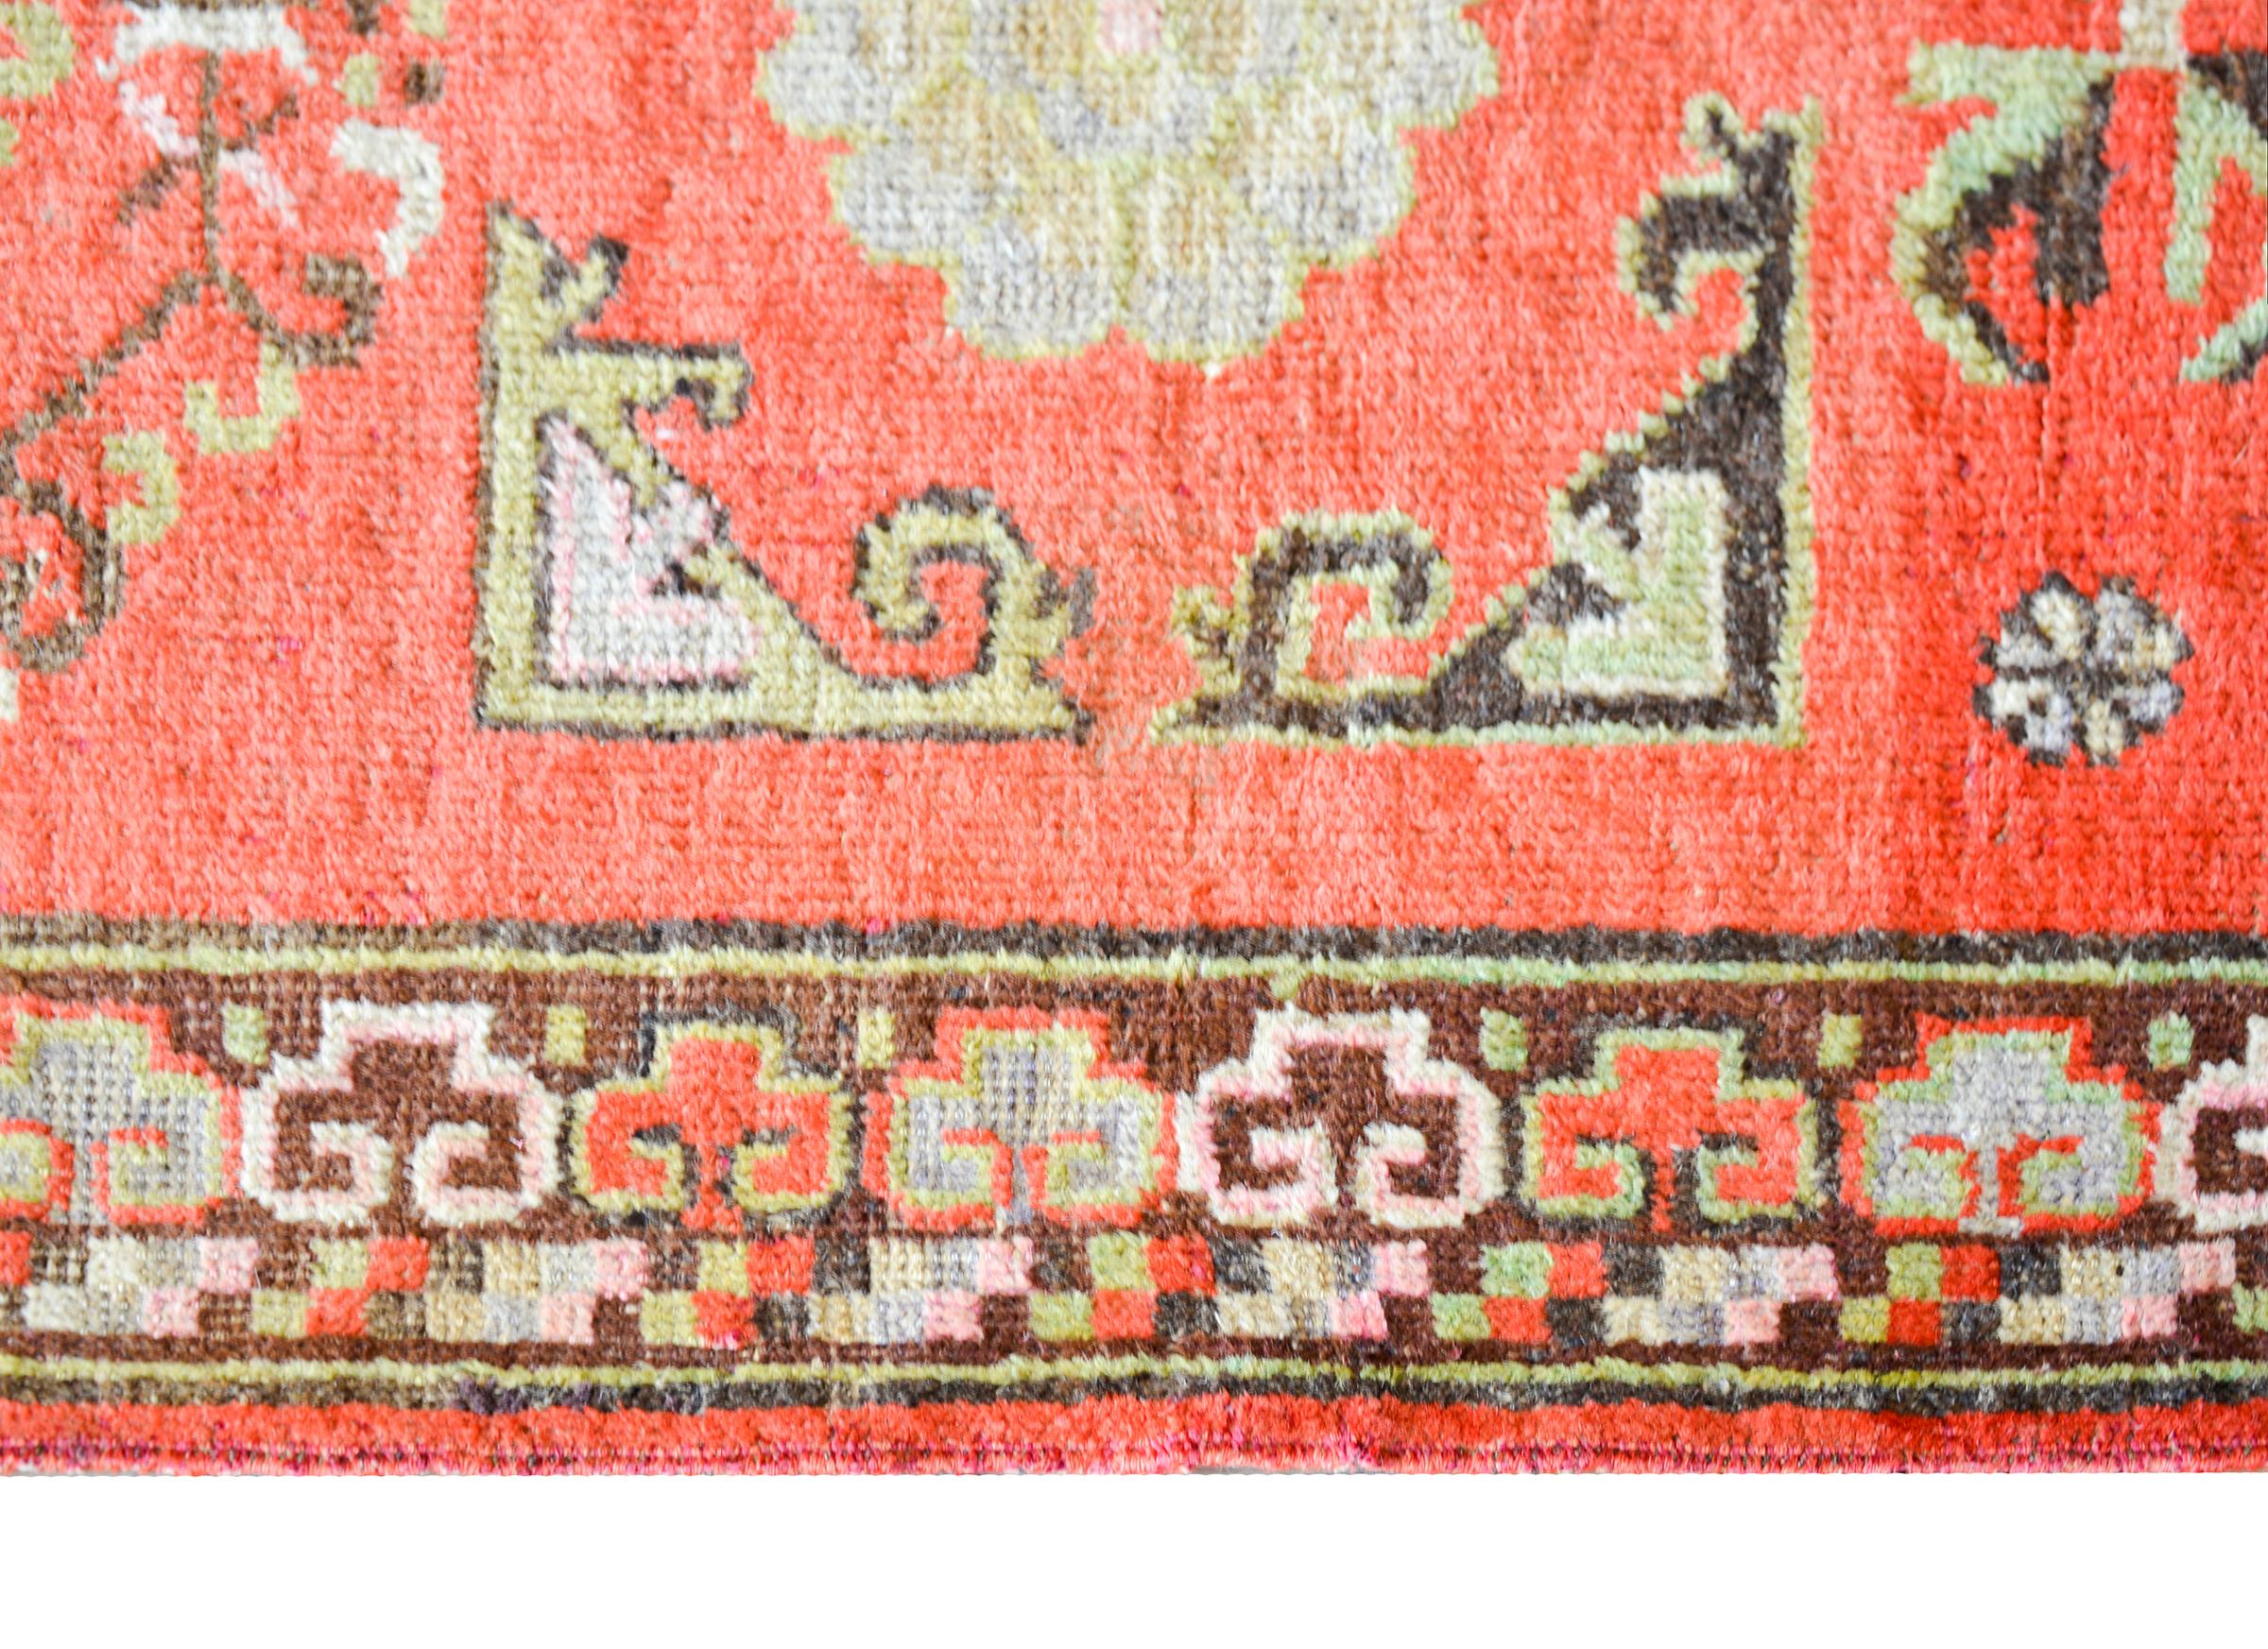 Mid-20th Century Early 20th Century Khotan Rug For Sale